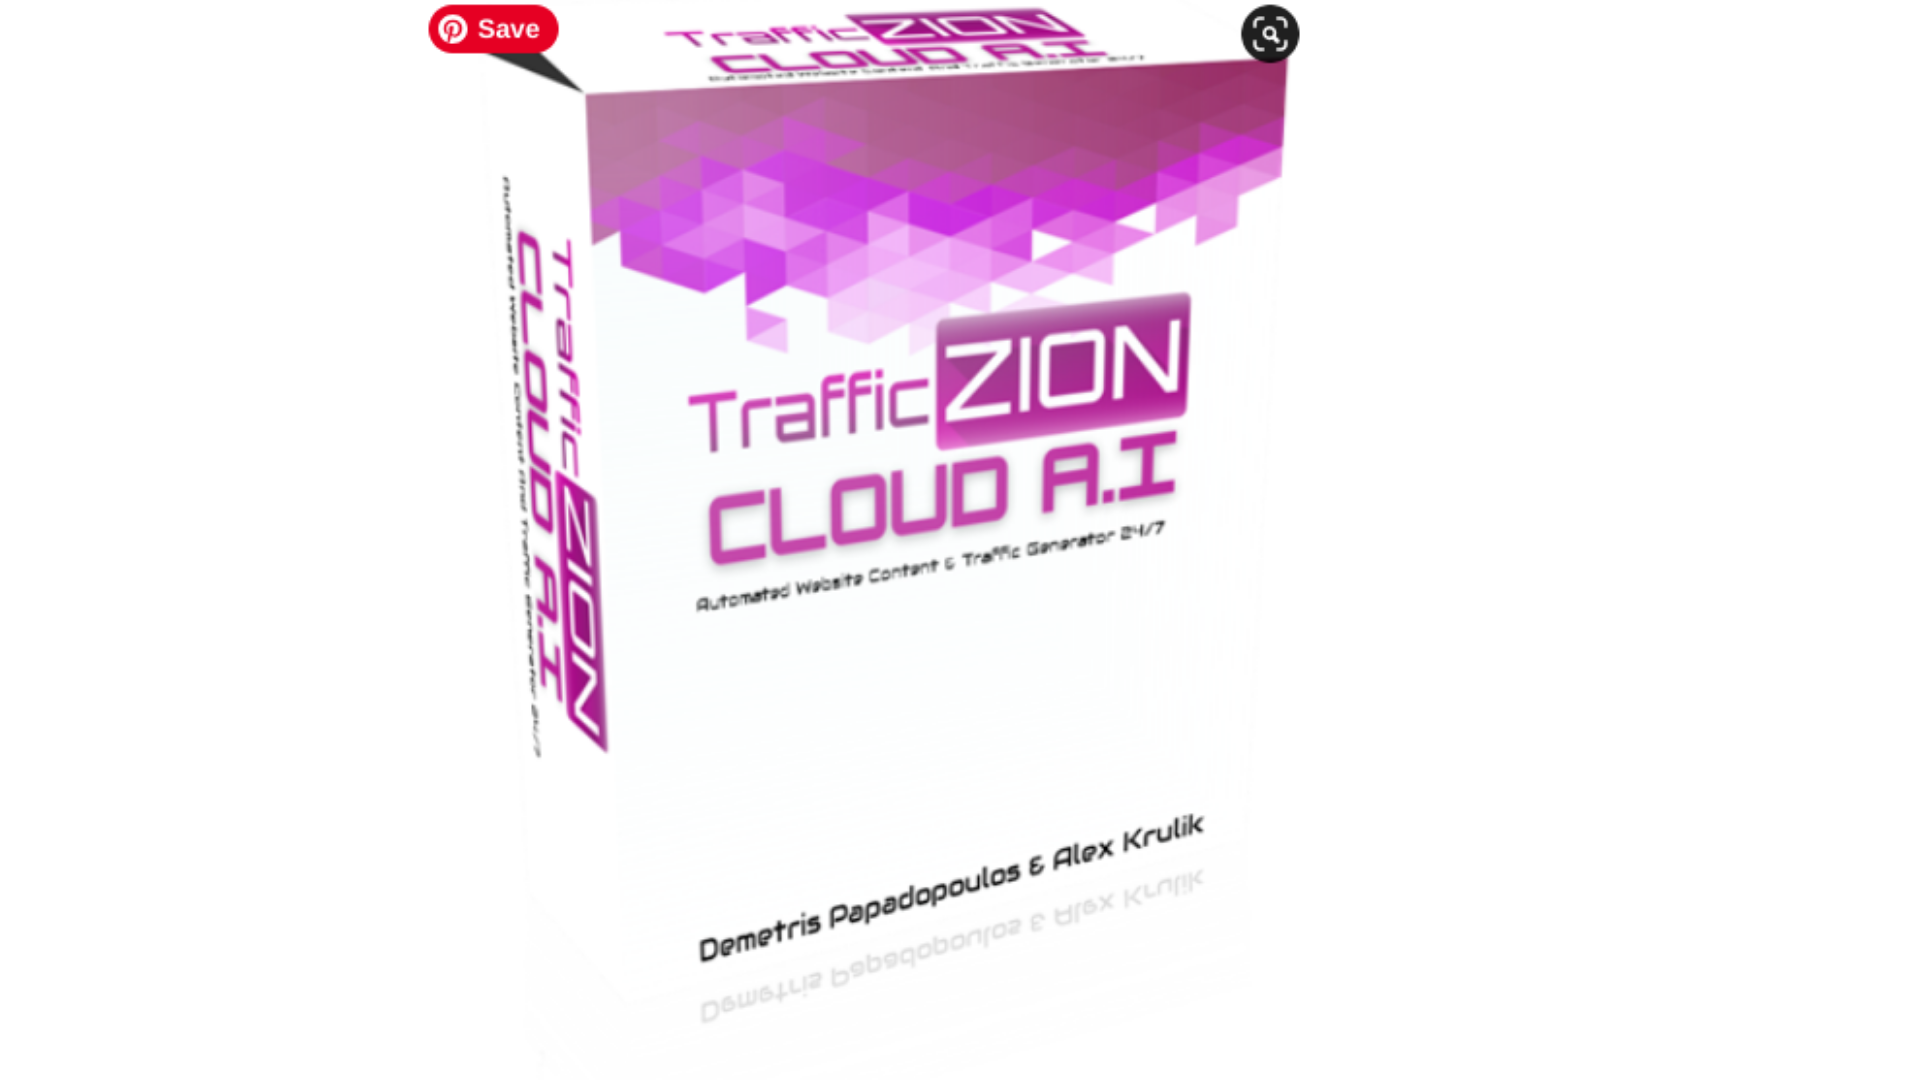 TrafficZION Cloud A.I Review